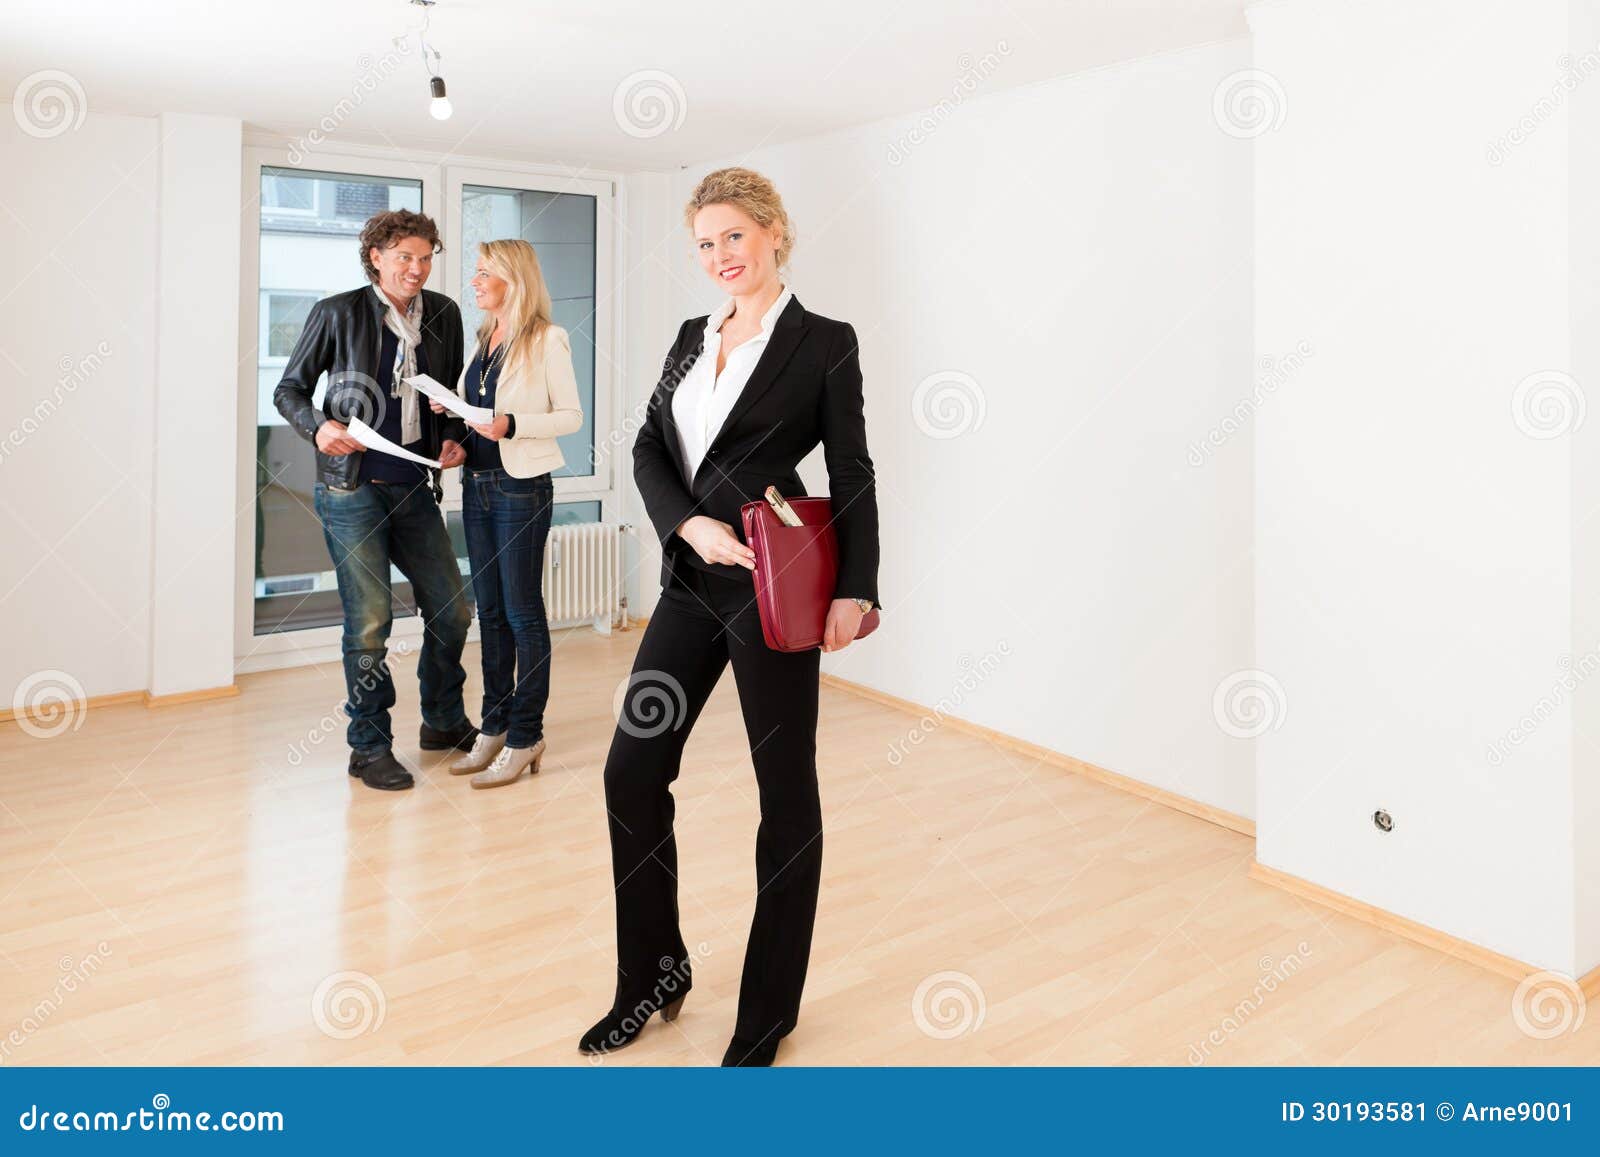 Young Couple Looking For Real Estate With Female Realtor Stock Image 